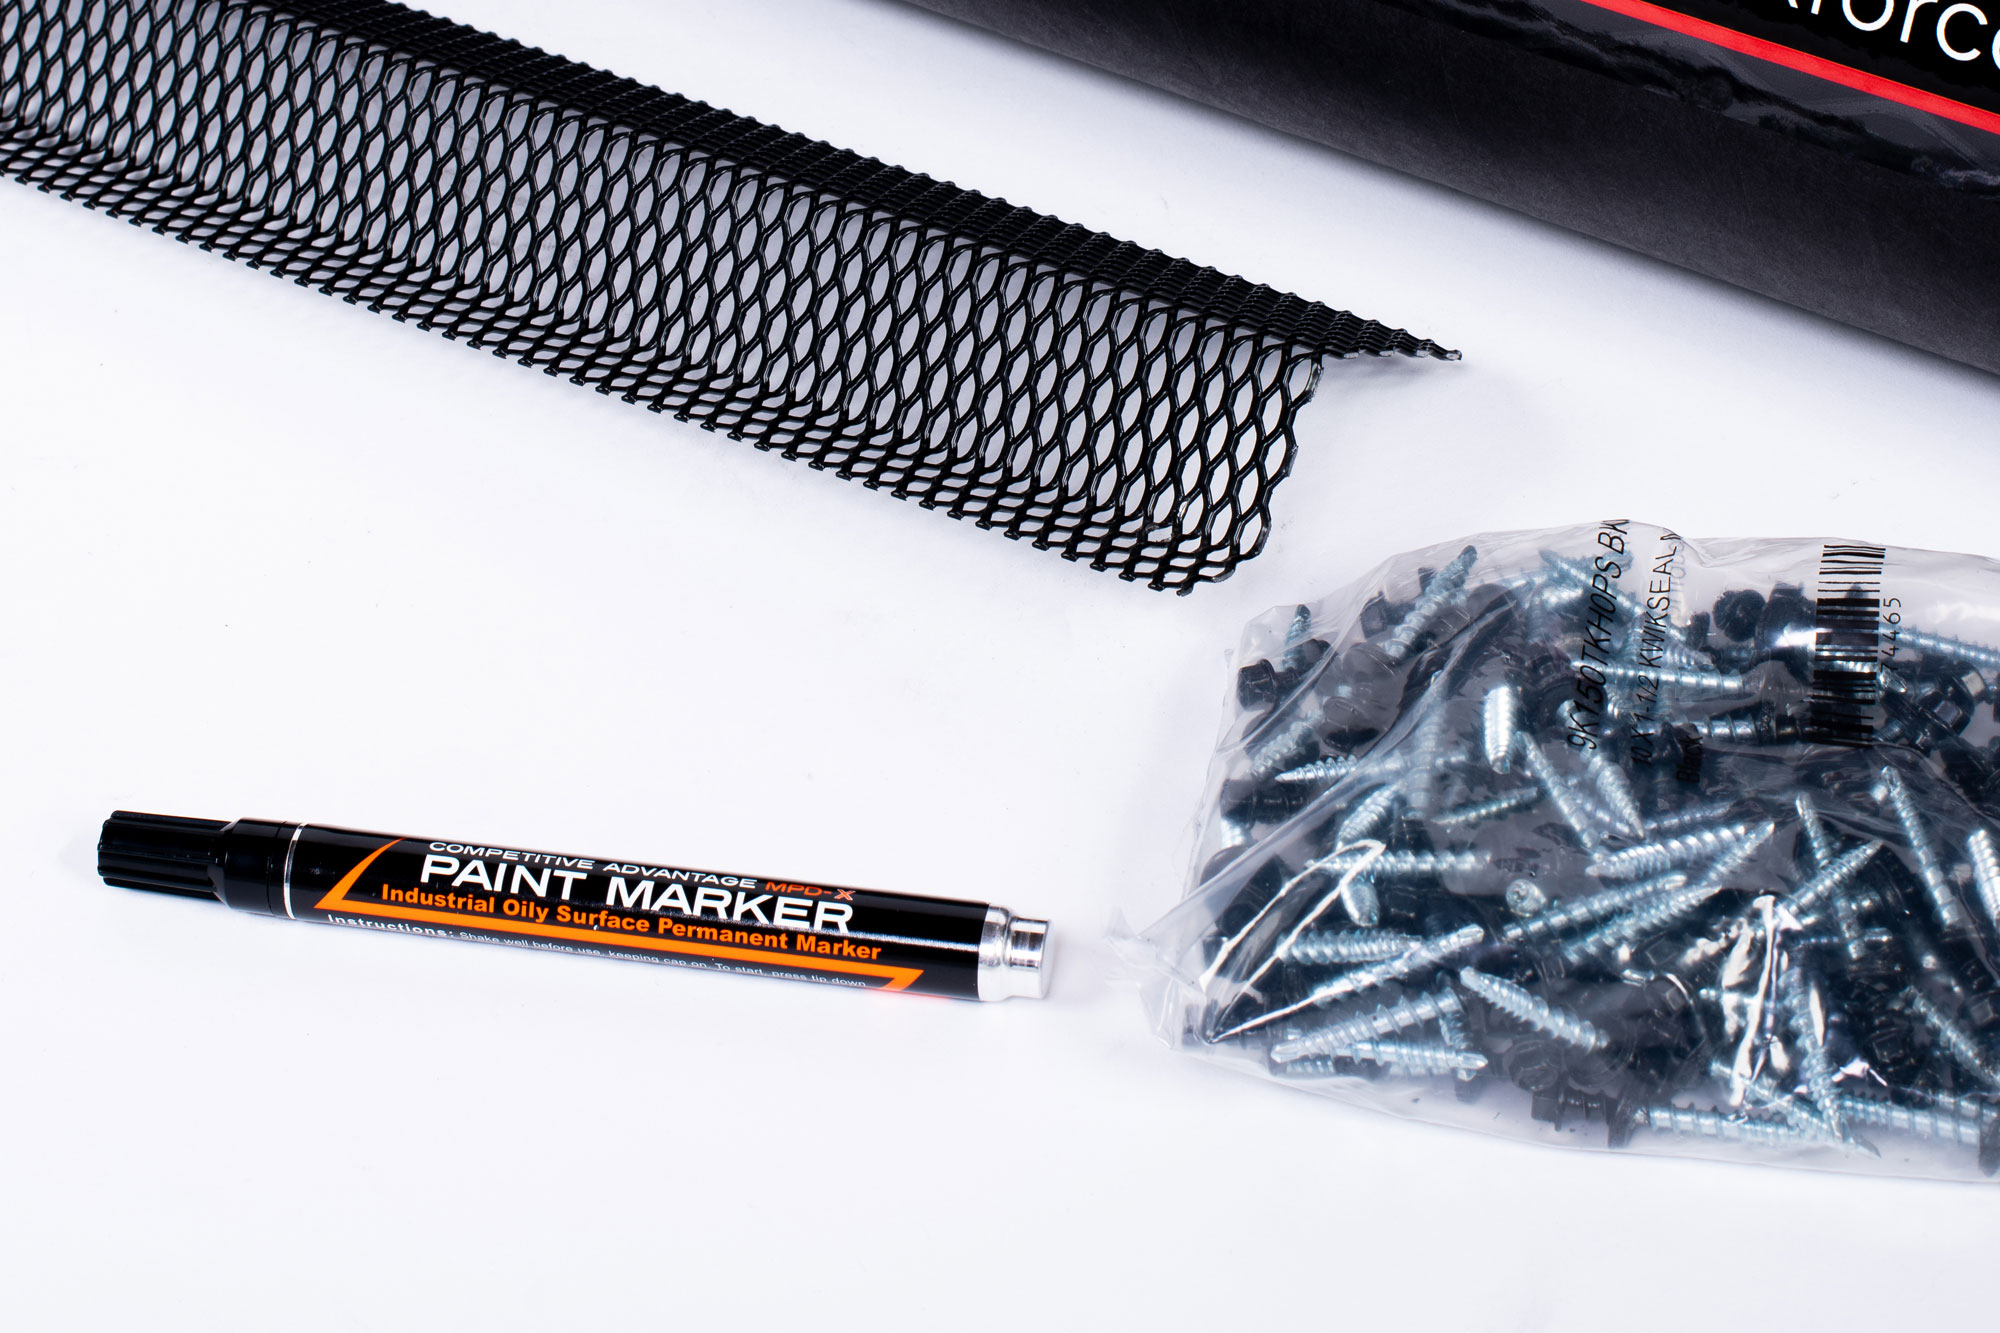 Ridge-Guard® Kit including vent cover, paint marker, and screws for installation